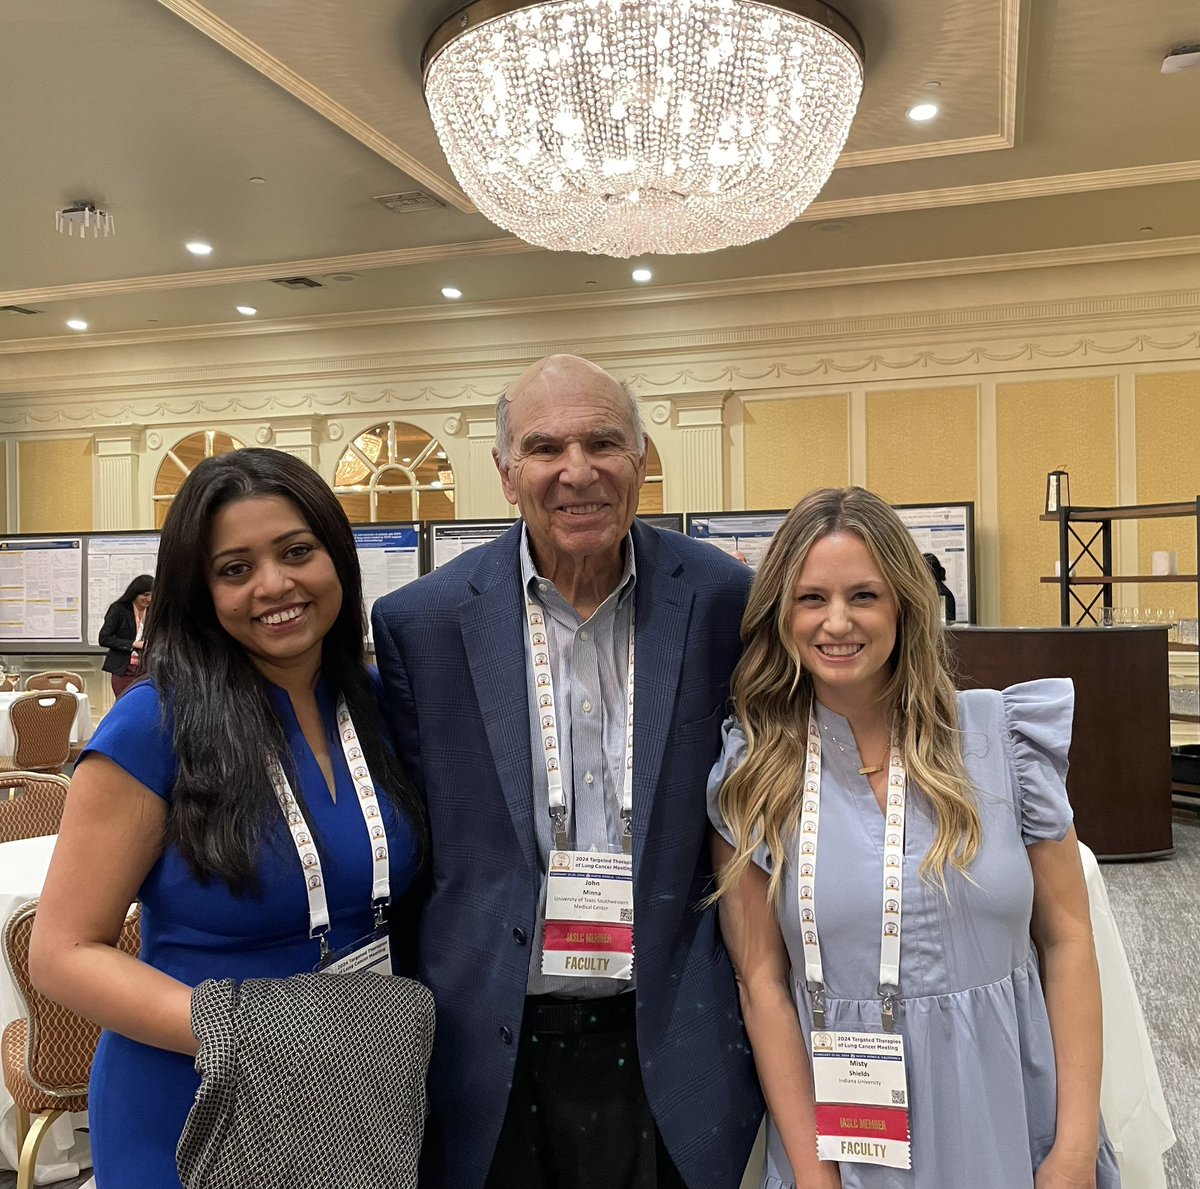 Lovely to speak with my forever #mentor, #friend, and #hero Dr. John Minna from @UTSWNews regarding the latest developments in #SCLC with my close friend and colleague @triparnasen at @IASLC #TTLC! 

Exciting news 🗞️ for #SCLC is coming! #LCSM #nothingsmallaboutit